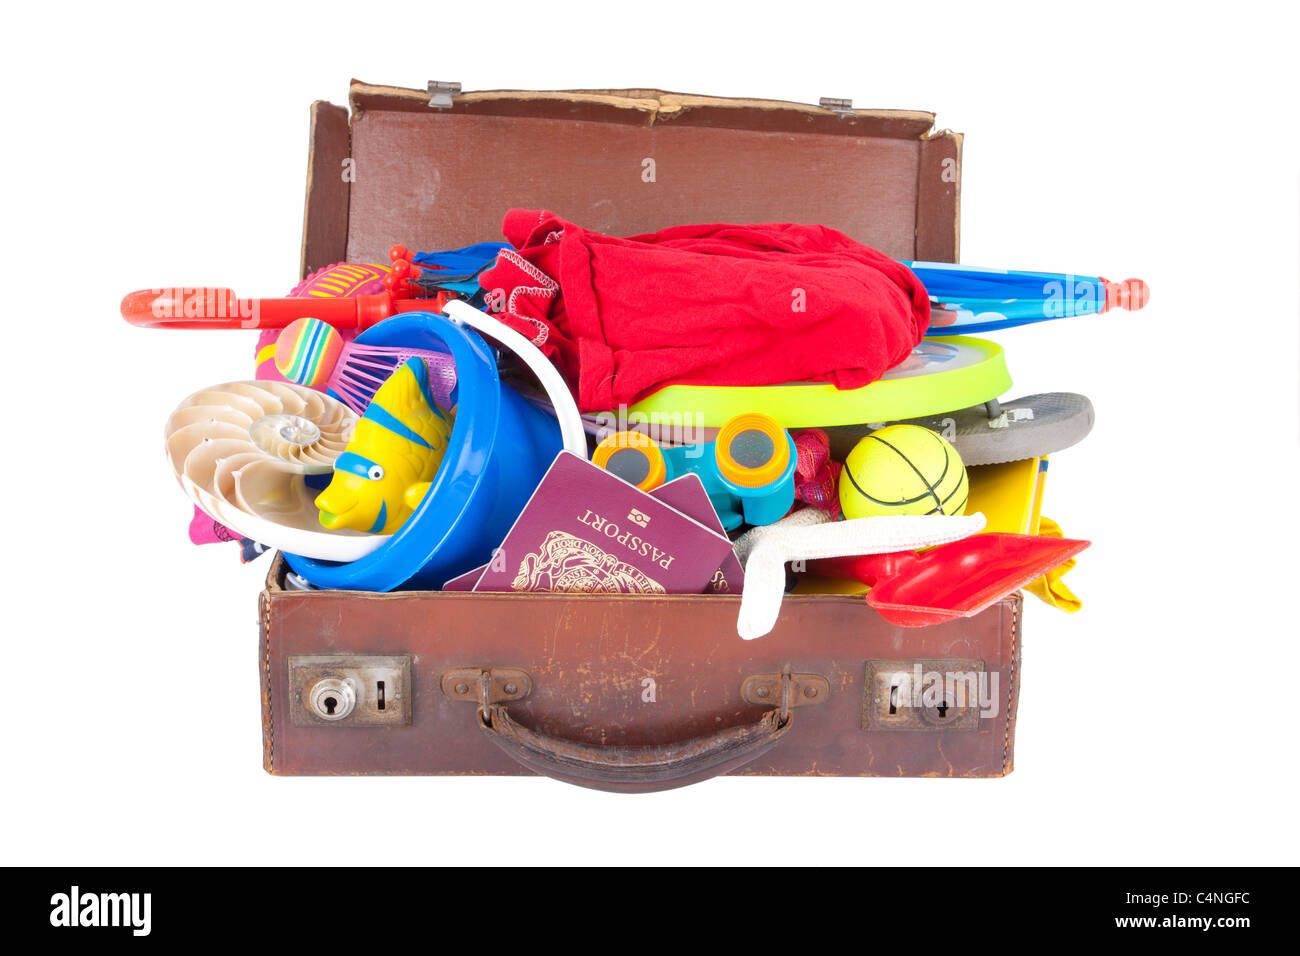 summer holiday beach and vacation suitcase packed full of clothes and toys Stock Photo